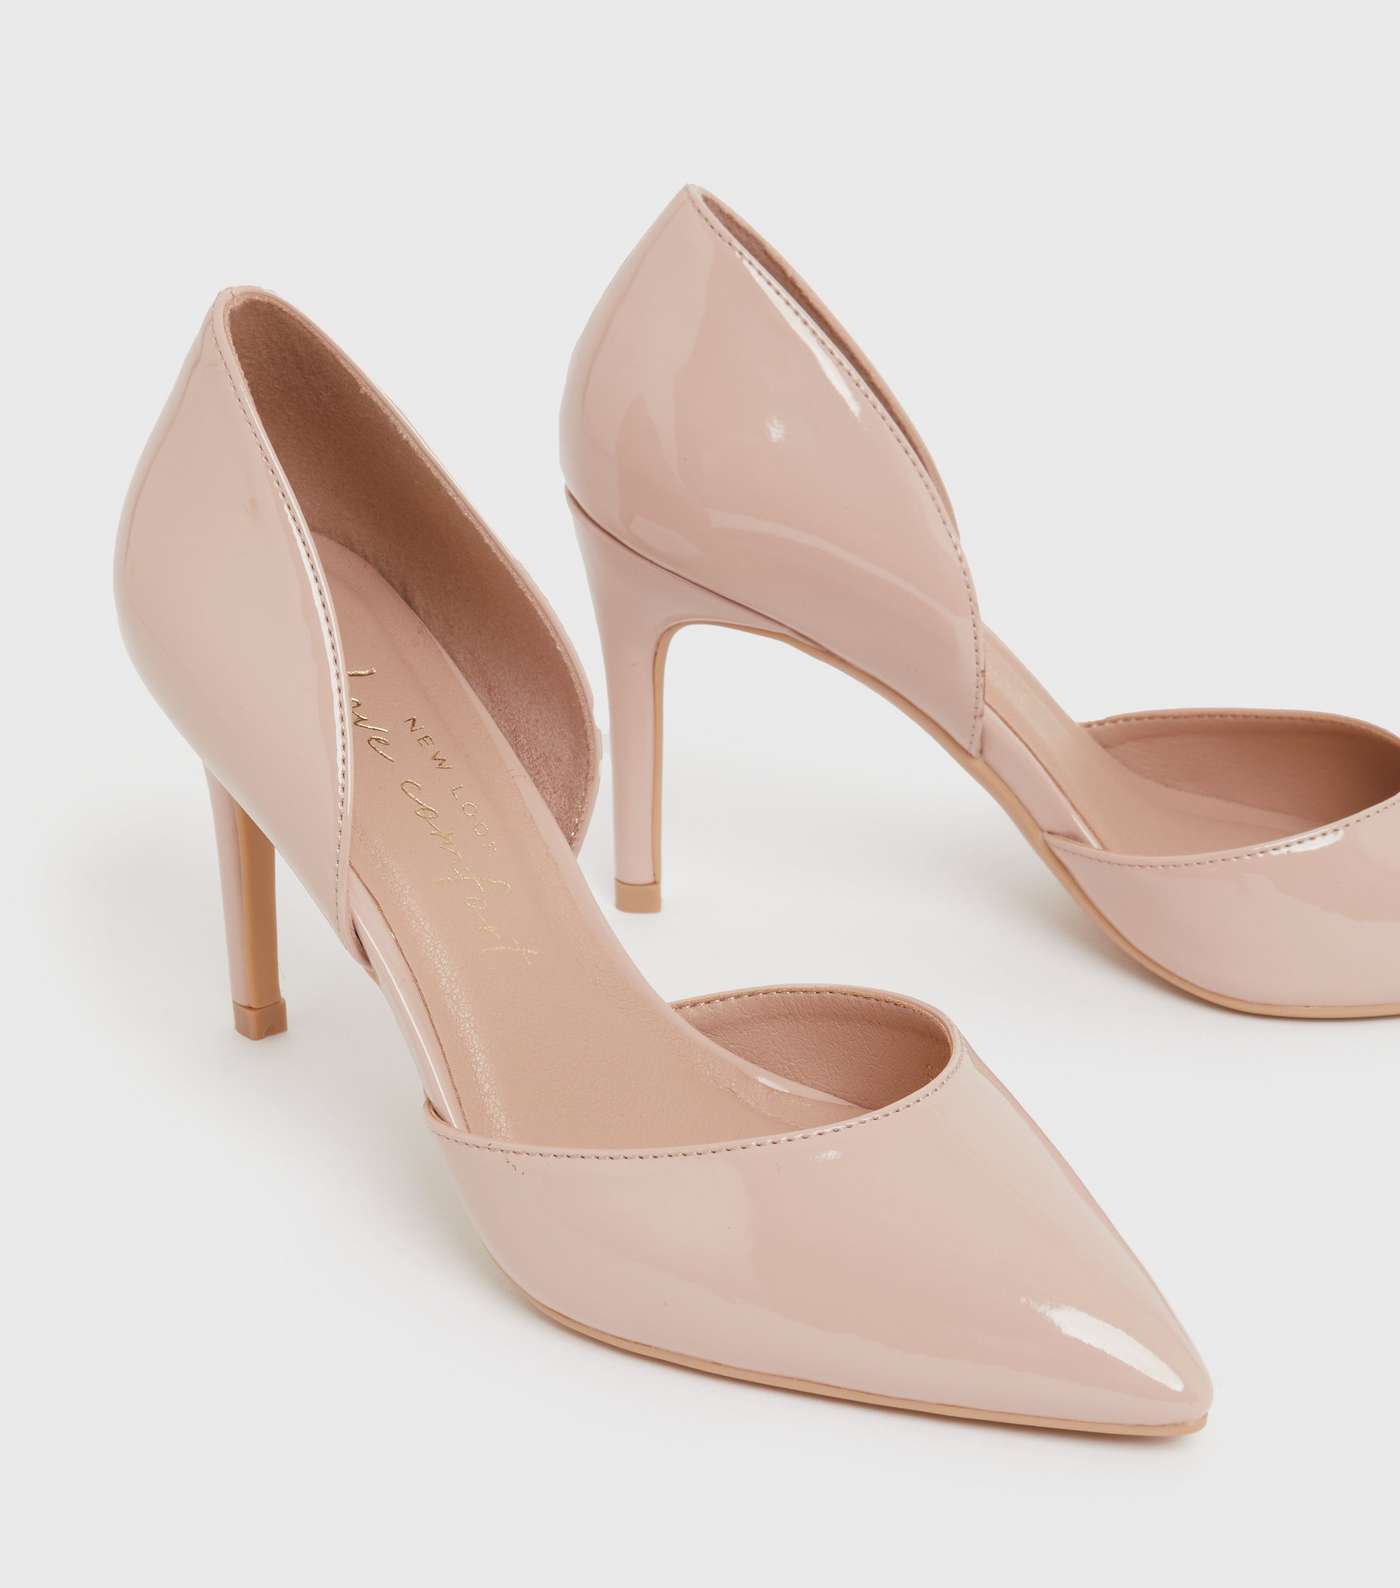 Cream Patent Pointed Stiletto Heel Court Shoes Image 3